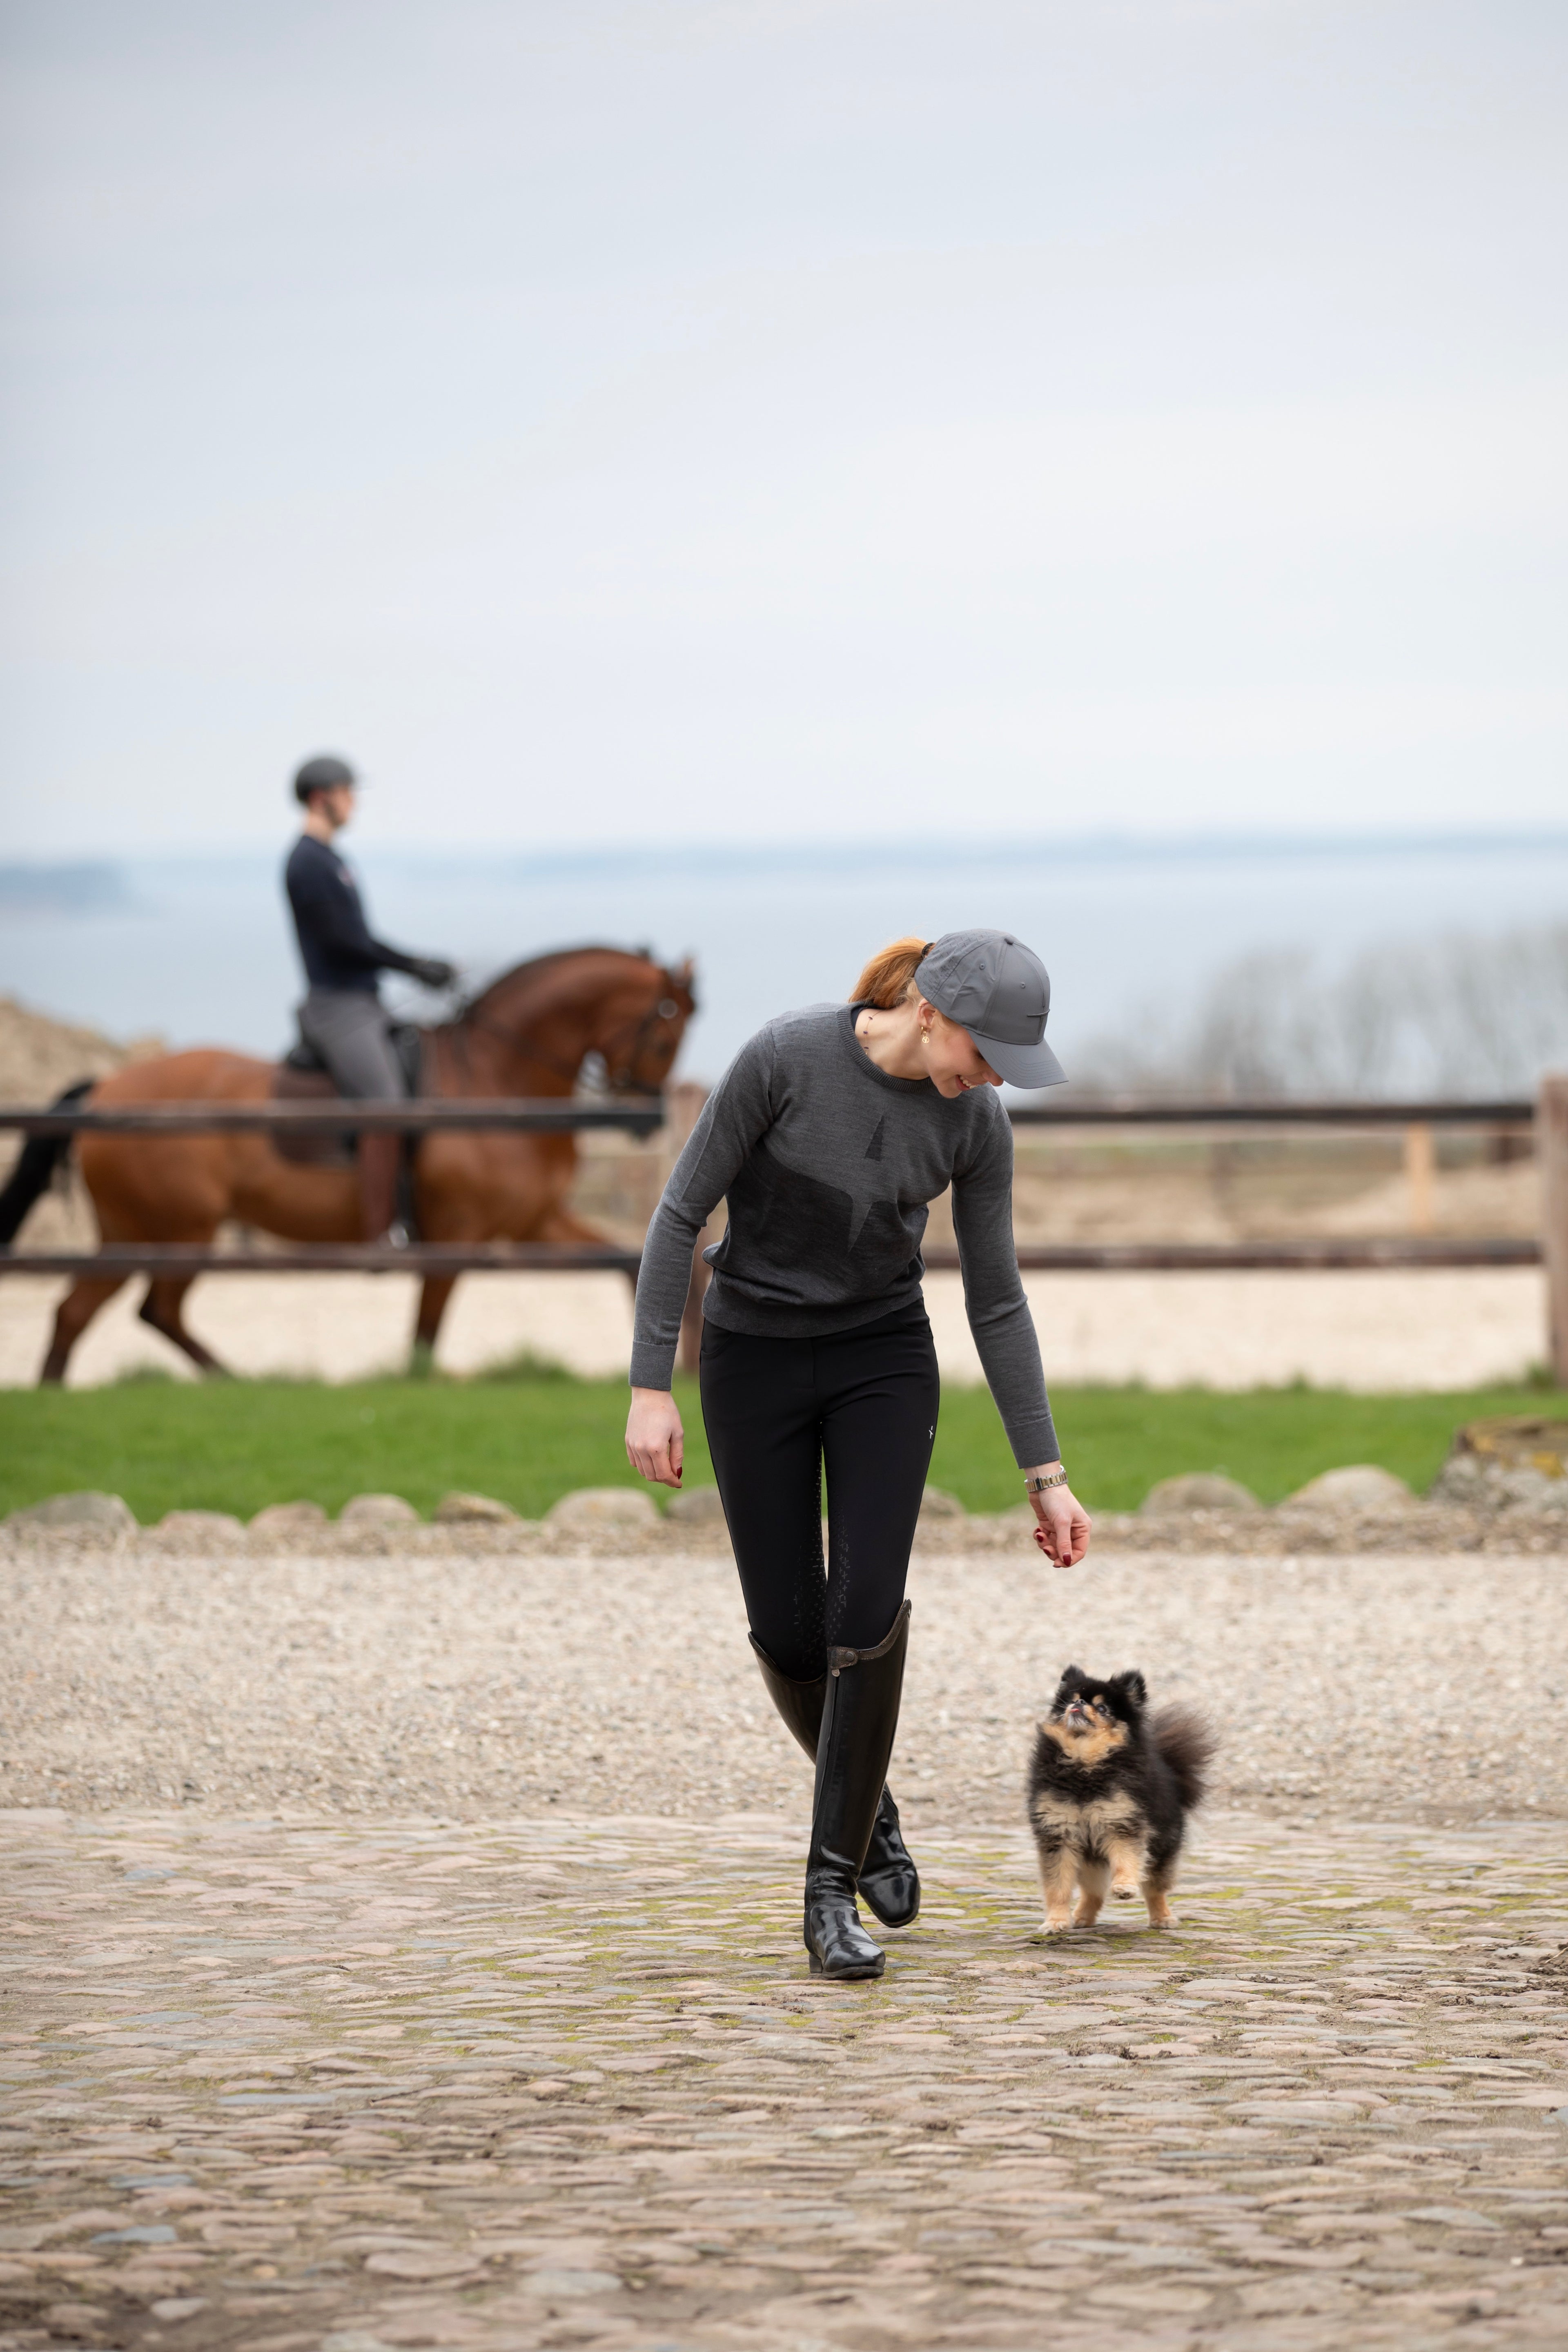 Trolle Luxury Equestrian clothing for men and women 